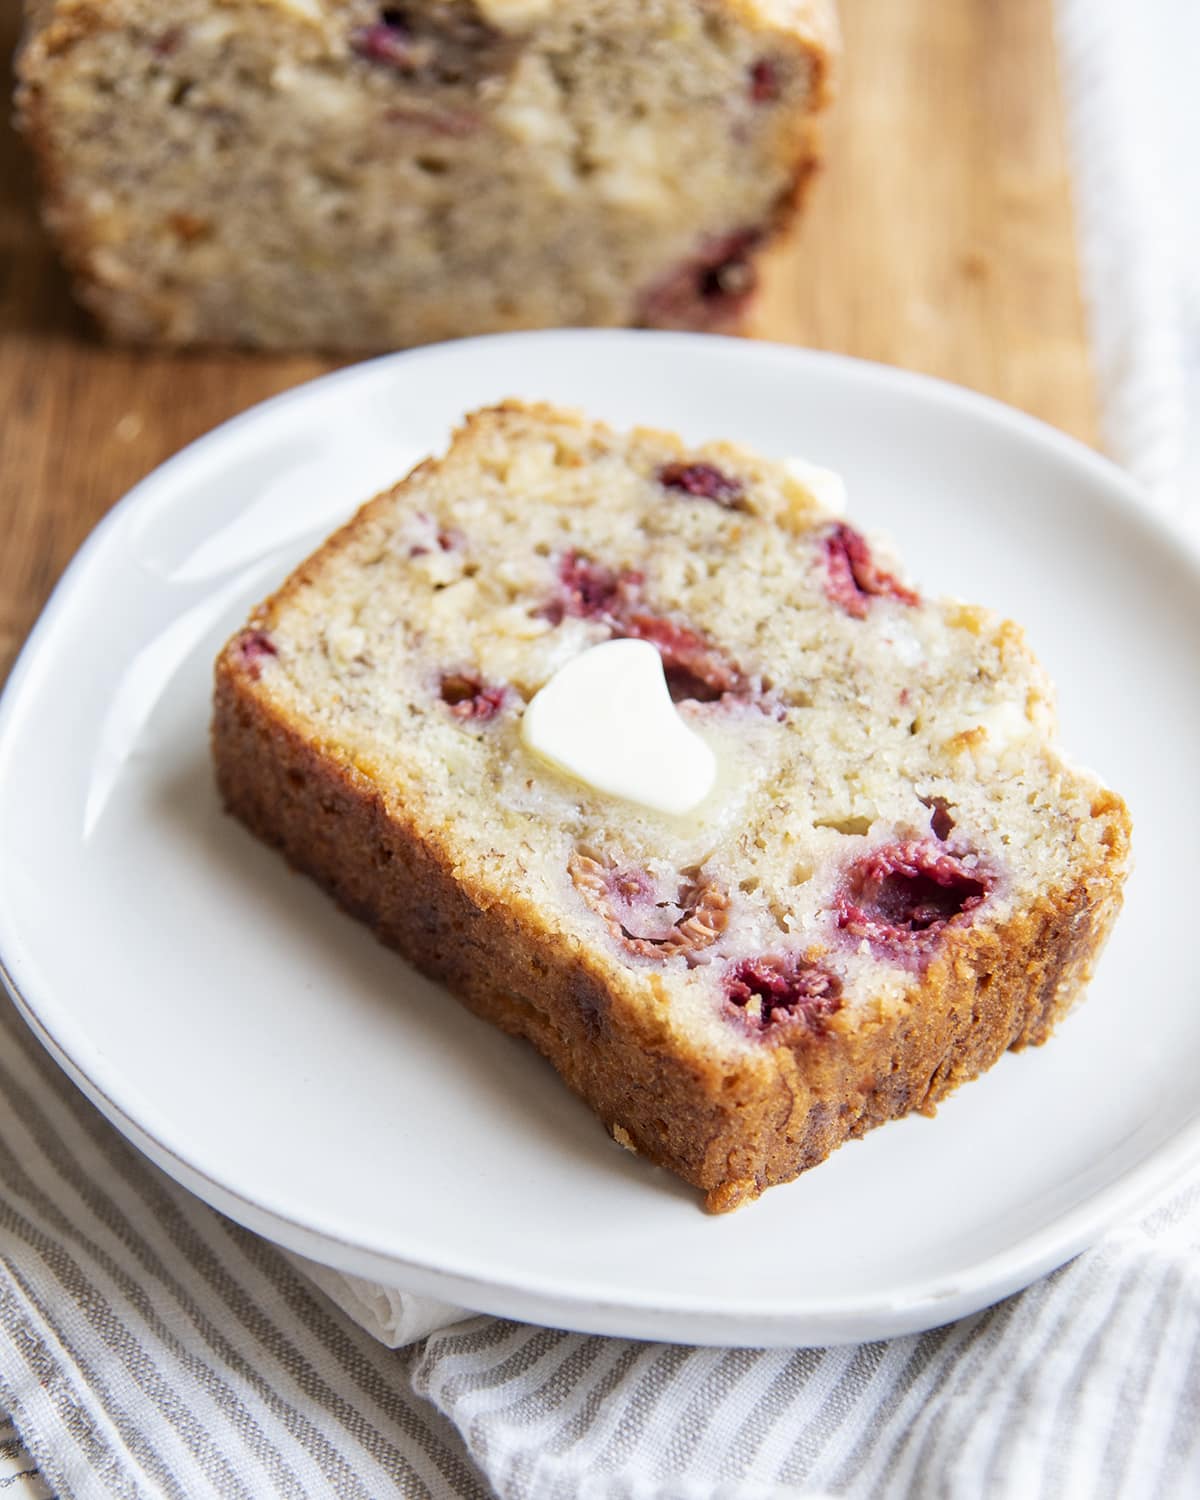 A slice of banana bread with raspberries and white chocolate chips with a melted butter slab on top.